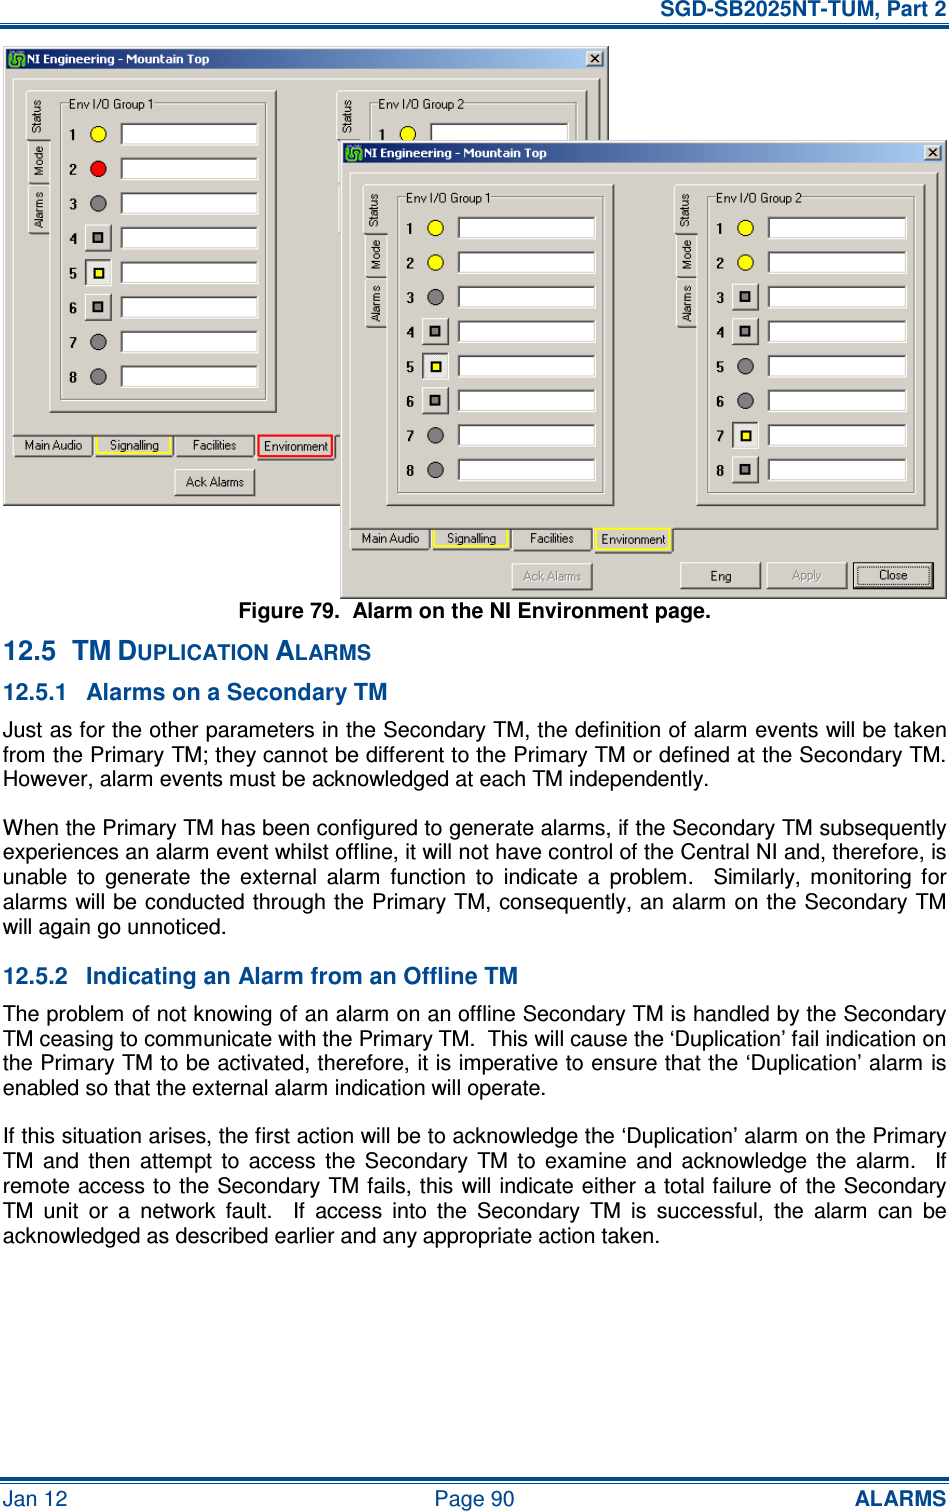   SGD-SB2025NT-TUM, Part 2 Jan 12  Page 90 ALARMS Figure 79.  Alarm on the NI Environment page. 12.5  TM DUPLICATION ALARMS 12.5.1  Alarms on a Secondary TM Just as for the other parameters in the Secondary TM, the definition of alarm events will be taken from the Primary TM; they cannot be different to the Primary TM or defined at the Secondary TM.  However, alarm events must be acknowledged at each TM independently. When the Primary TM has been configured to generate alarms, if the Secondary TM subsequently experiences an alarm event whilst offline, it will not have control of the Central NI and, therefore, is unable  to  generate  the  external  alarm  function  to  indicate  a  problem.    Similarly,  monitoring  for alarms will be conducted through the Primary TM, consequently, an alarm on the Secondary TM will again go unnoticed. 12.5.2  Indicating an Alarm from an Offline TM The problem of not knowing of an alarm on an offline Secondary TM is handled by the Secondary TM ceasing to communicate with the Primary TM.  This will cause the ‘Duplication’ fail indication on the Primary TM to be activated, therefore, it is imperative to ensure that the ‘Duplication’ alarm is enabled so that the external alarm indication will operate. If this situation arises, the first action will be to acknowledge the ‘Duplication’ alarm on the Primary TM  and  then  attempt  to  access  the  Secondary  TM  to  examine  and  acknowledge  the  alarm.    If remote access to the Secondary TM fails, this will indicate either a total failure of the Secondary TM  unit  or  a  network  fault.    If  access  into  the  Secondary  TM  is  successful,  the  alarm  can  be acknowledged as described earlier and any appropriate action taken. 